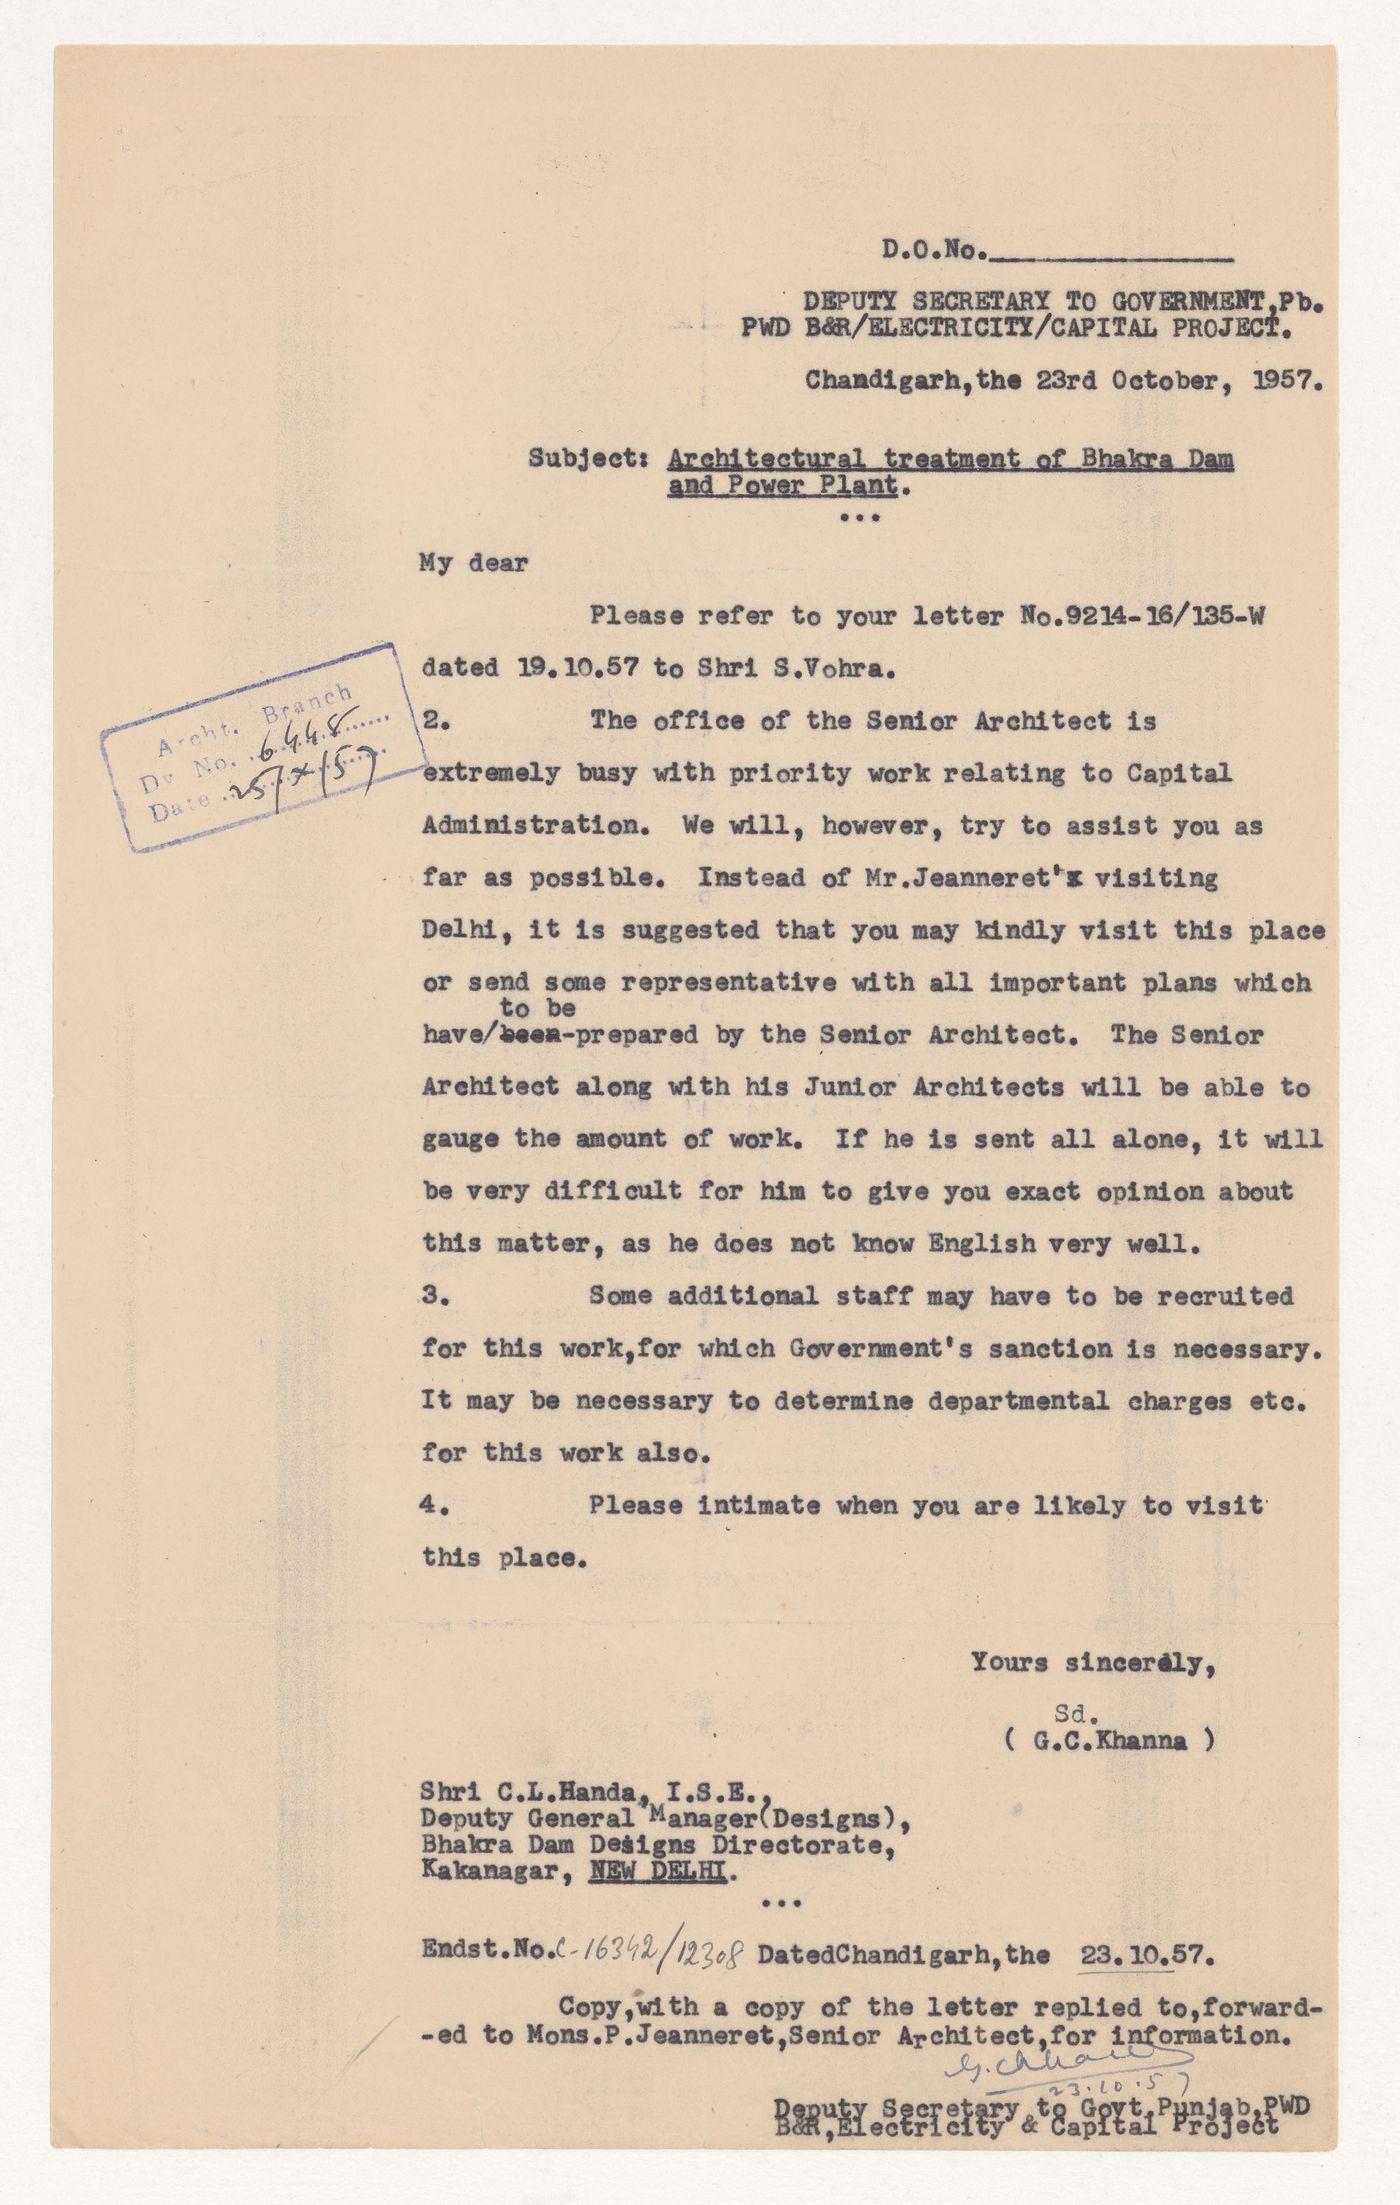 Copy of a letter from G.C. Khanna to C.L. Handa sent to Pierre Jeanneret relatively to the Bhakra Dam, India